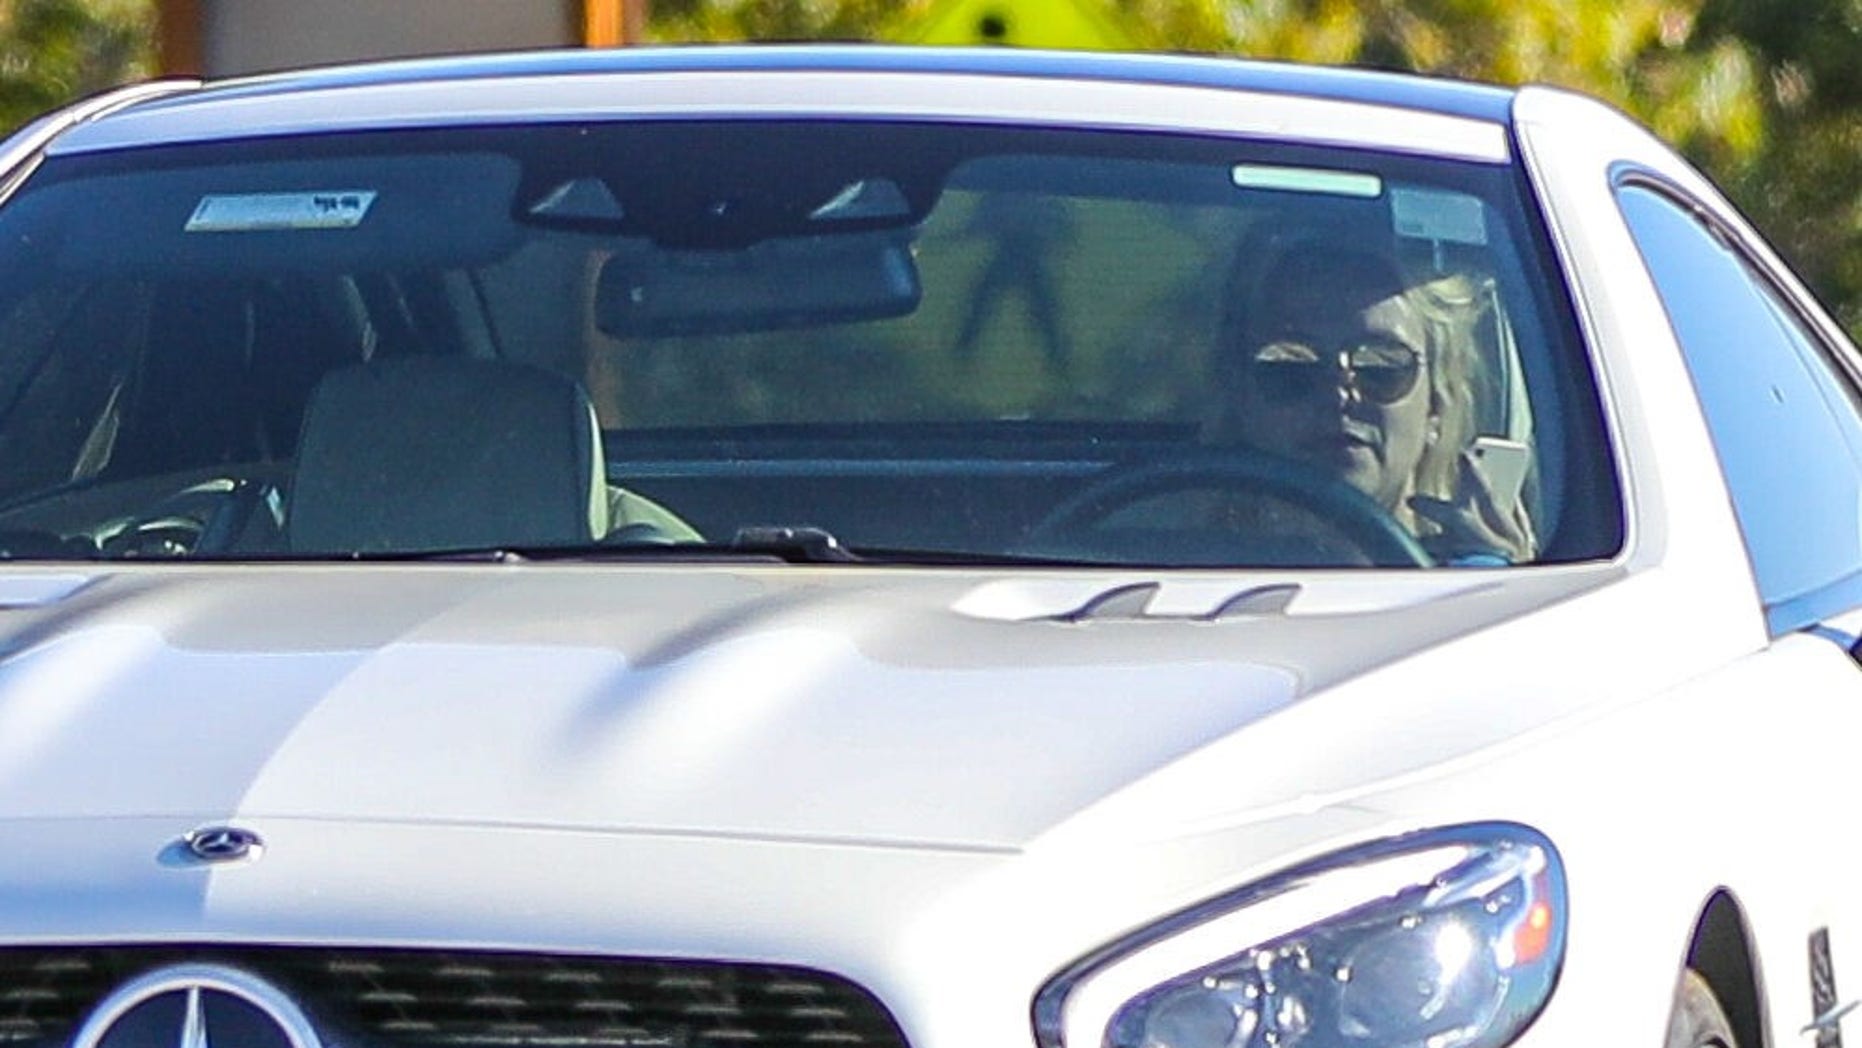 The 39-year-old Britney Spears drove her new Car near her home earlier this...